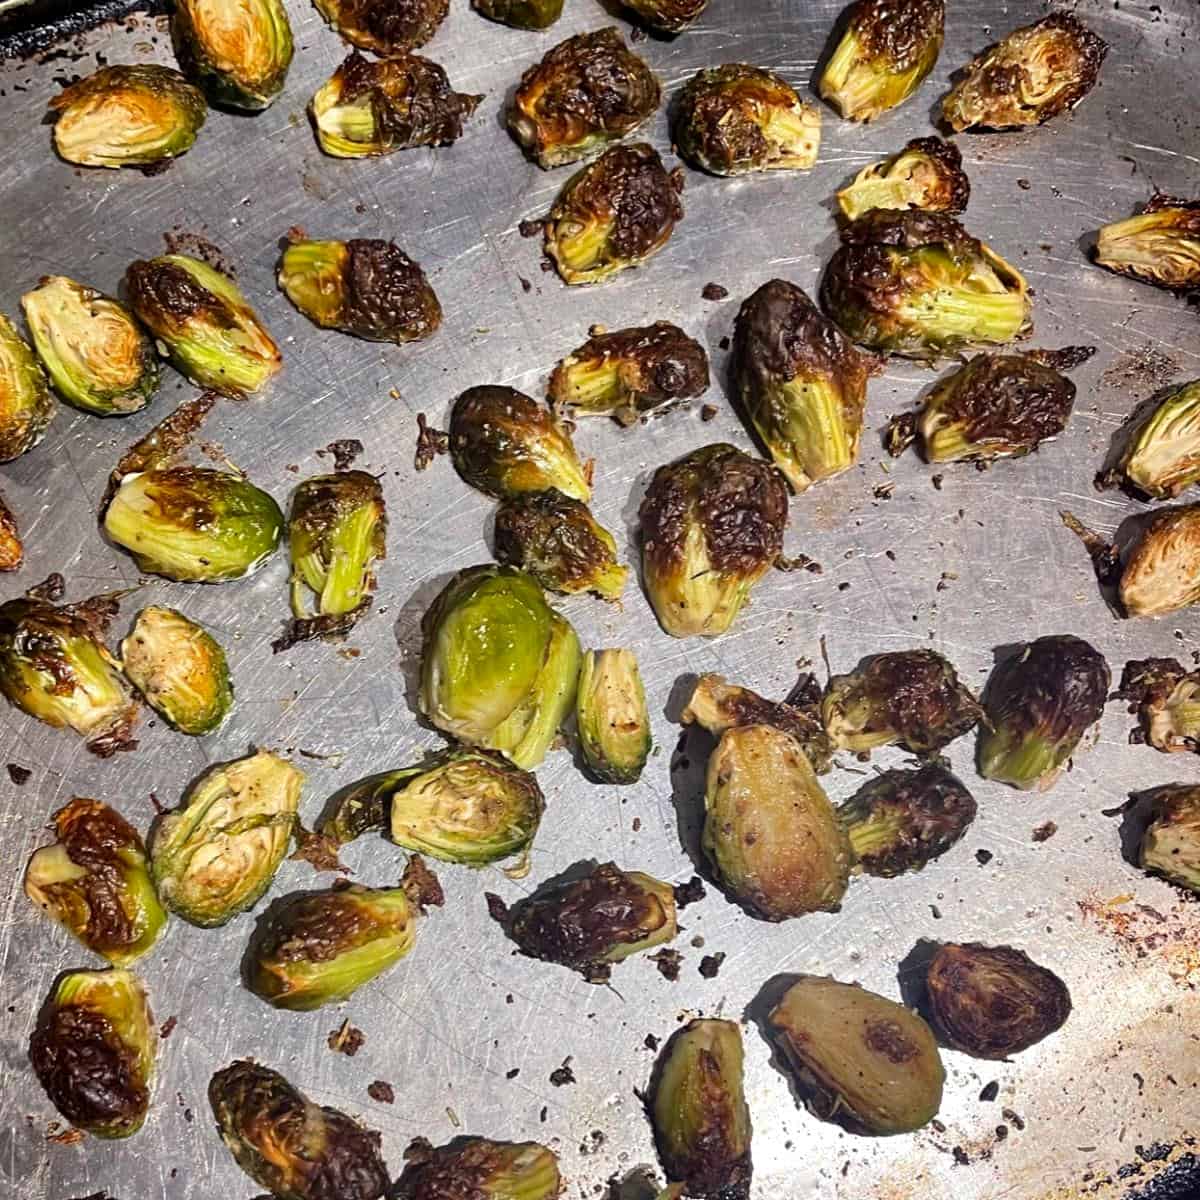 Roasted brussels sprouts on baking sheet.